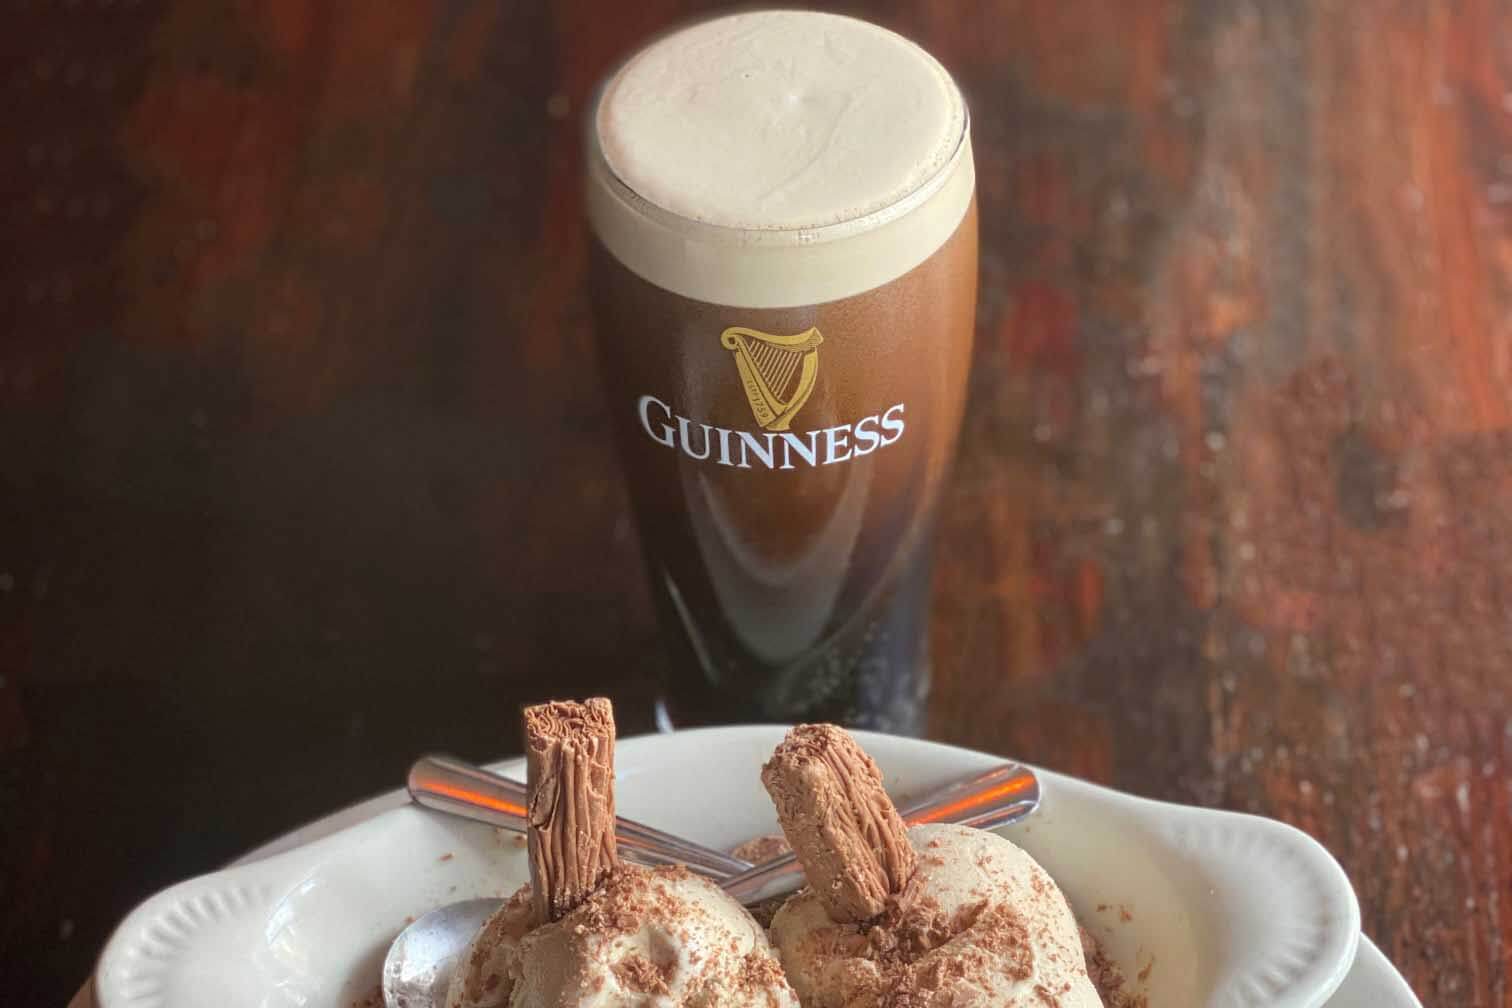 Celtic Ray Public House Meal with Guinness